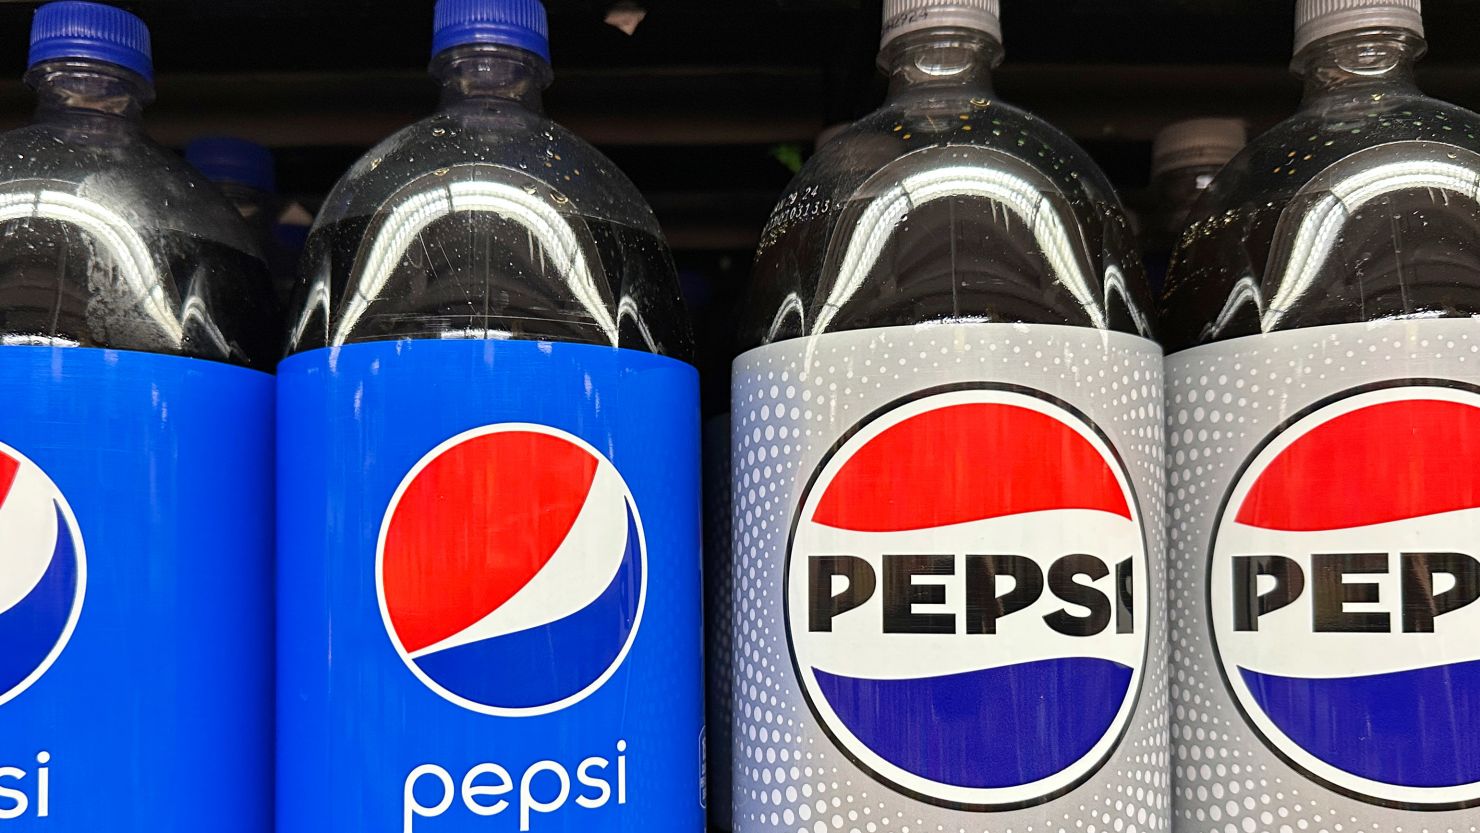 Pepsi soft drinks in plastic bottles are on sale at a grocery store in New York on Weds., Nov. 15, 2023. (AP Photo/Ted Shaffrey)